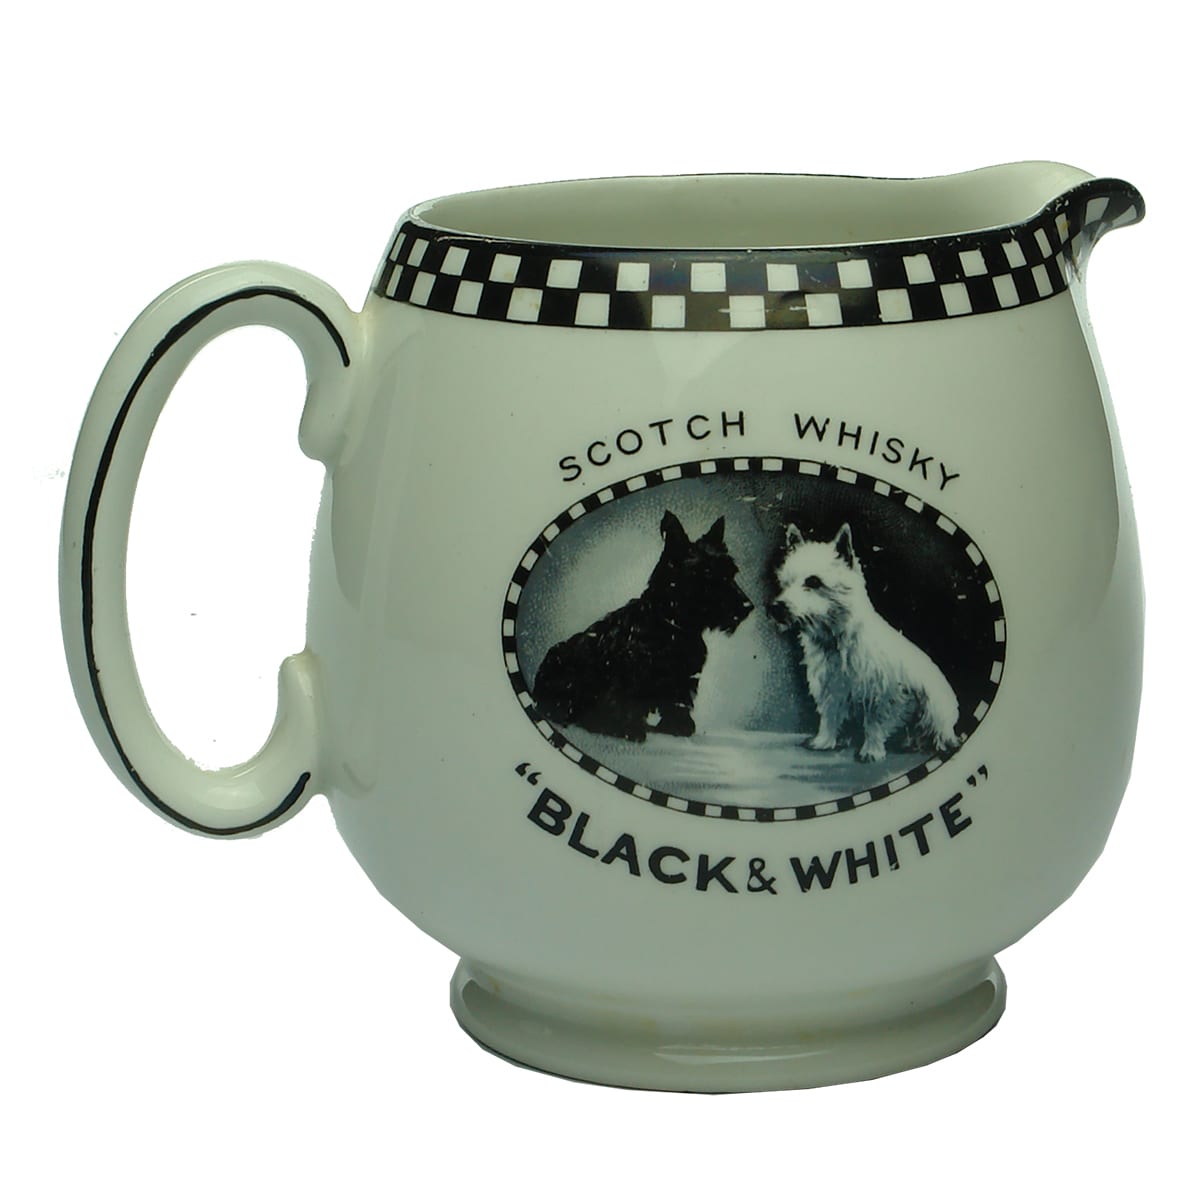 Whisky. Black & White Scotch Whisky. Two Dogs. Shelley. Water Jug.